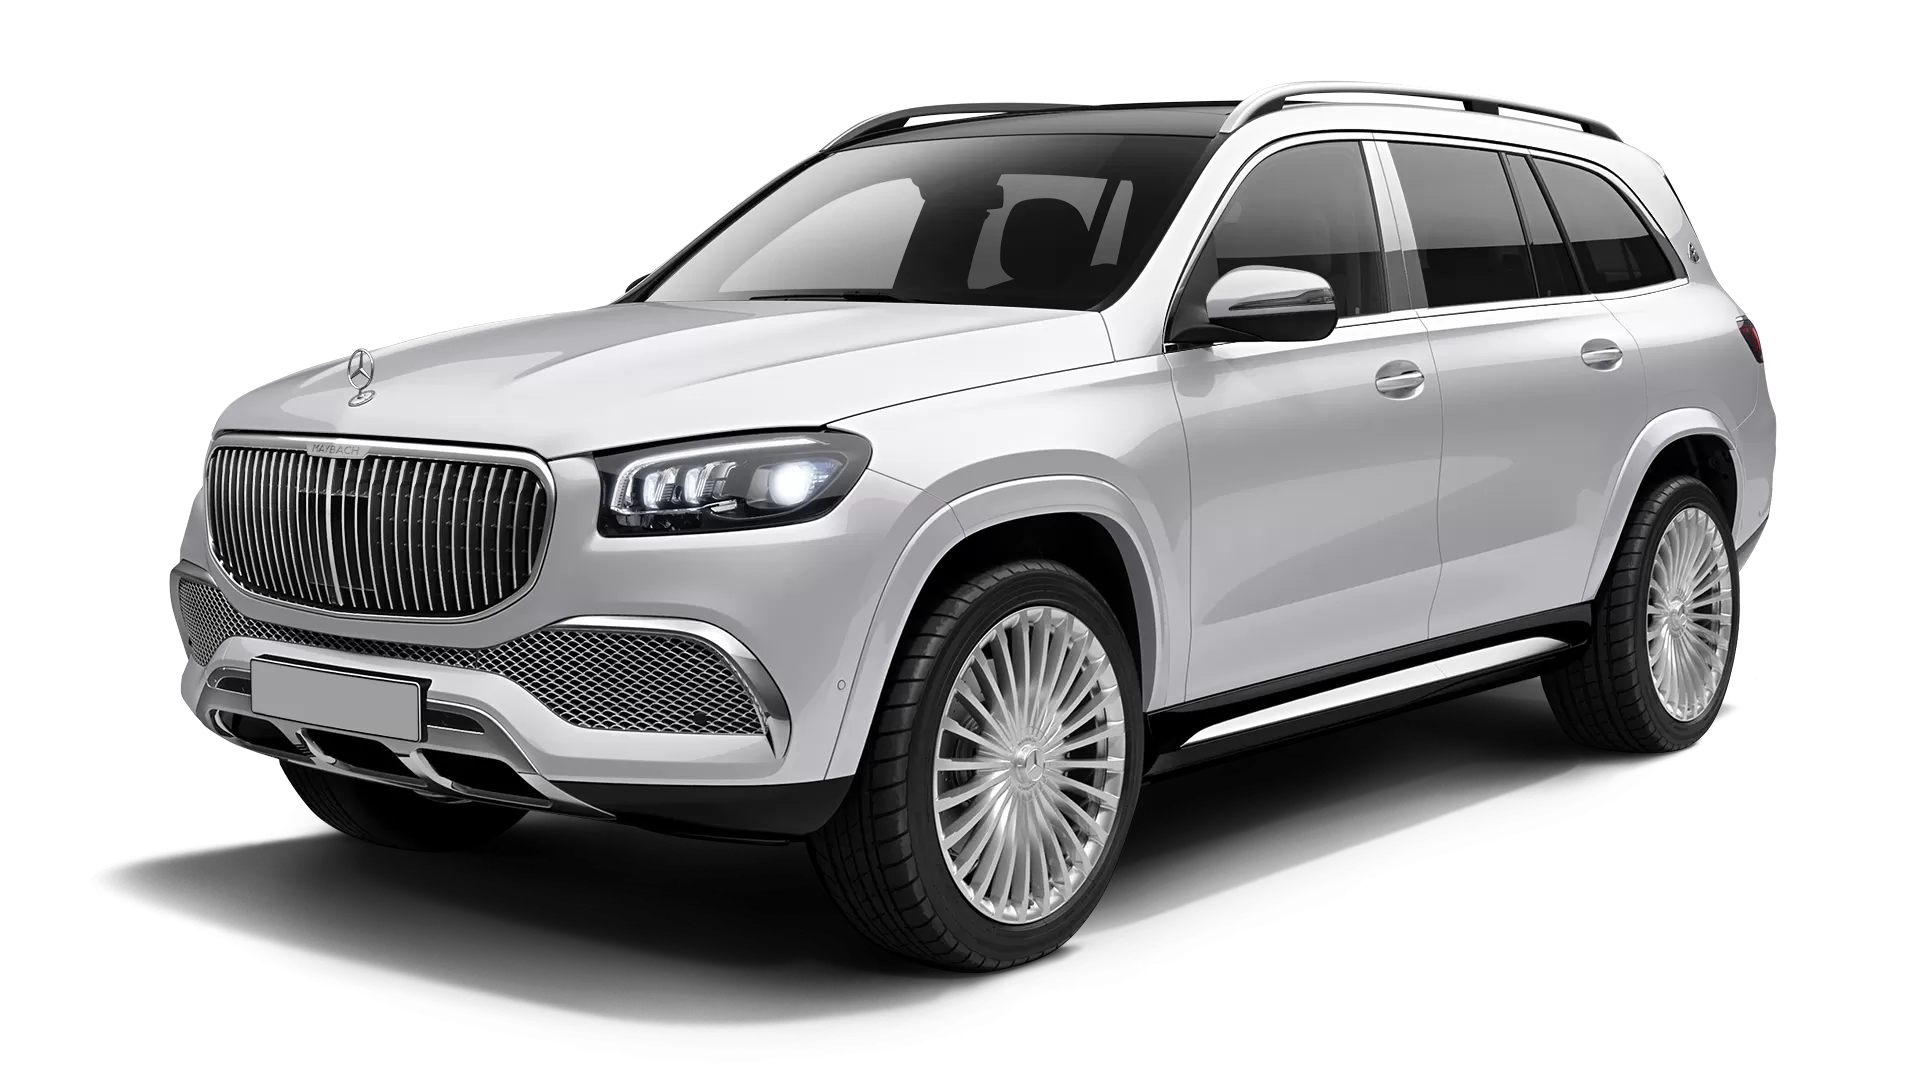 Mercedes Maybach GLS 600 stock front view in Polar White color